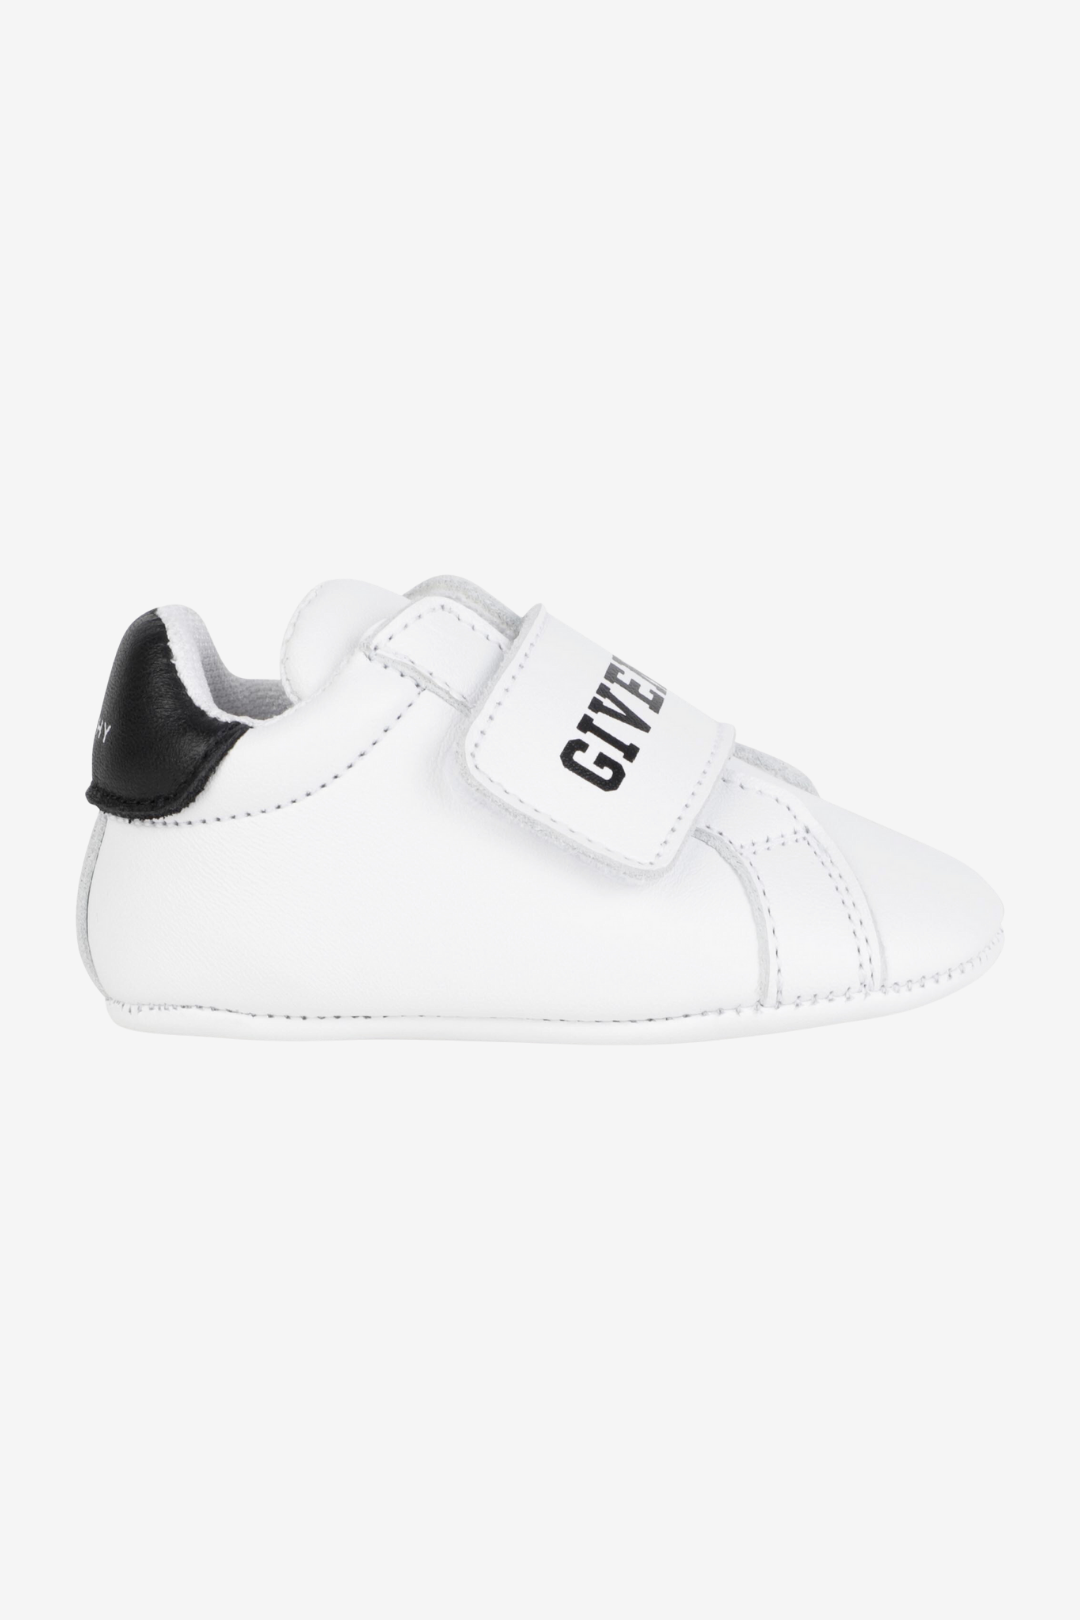 Baby Shoes with Givenchy Logo